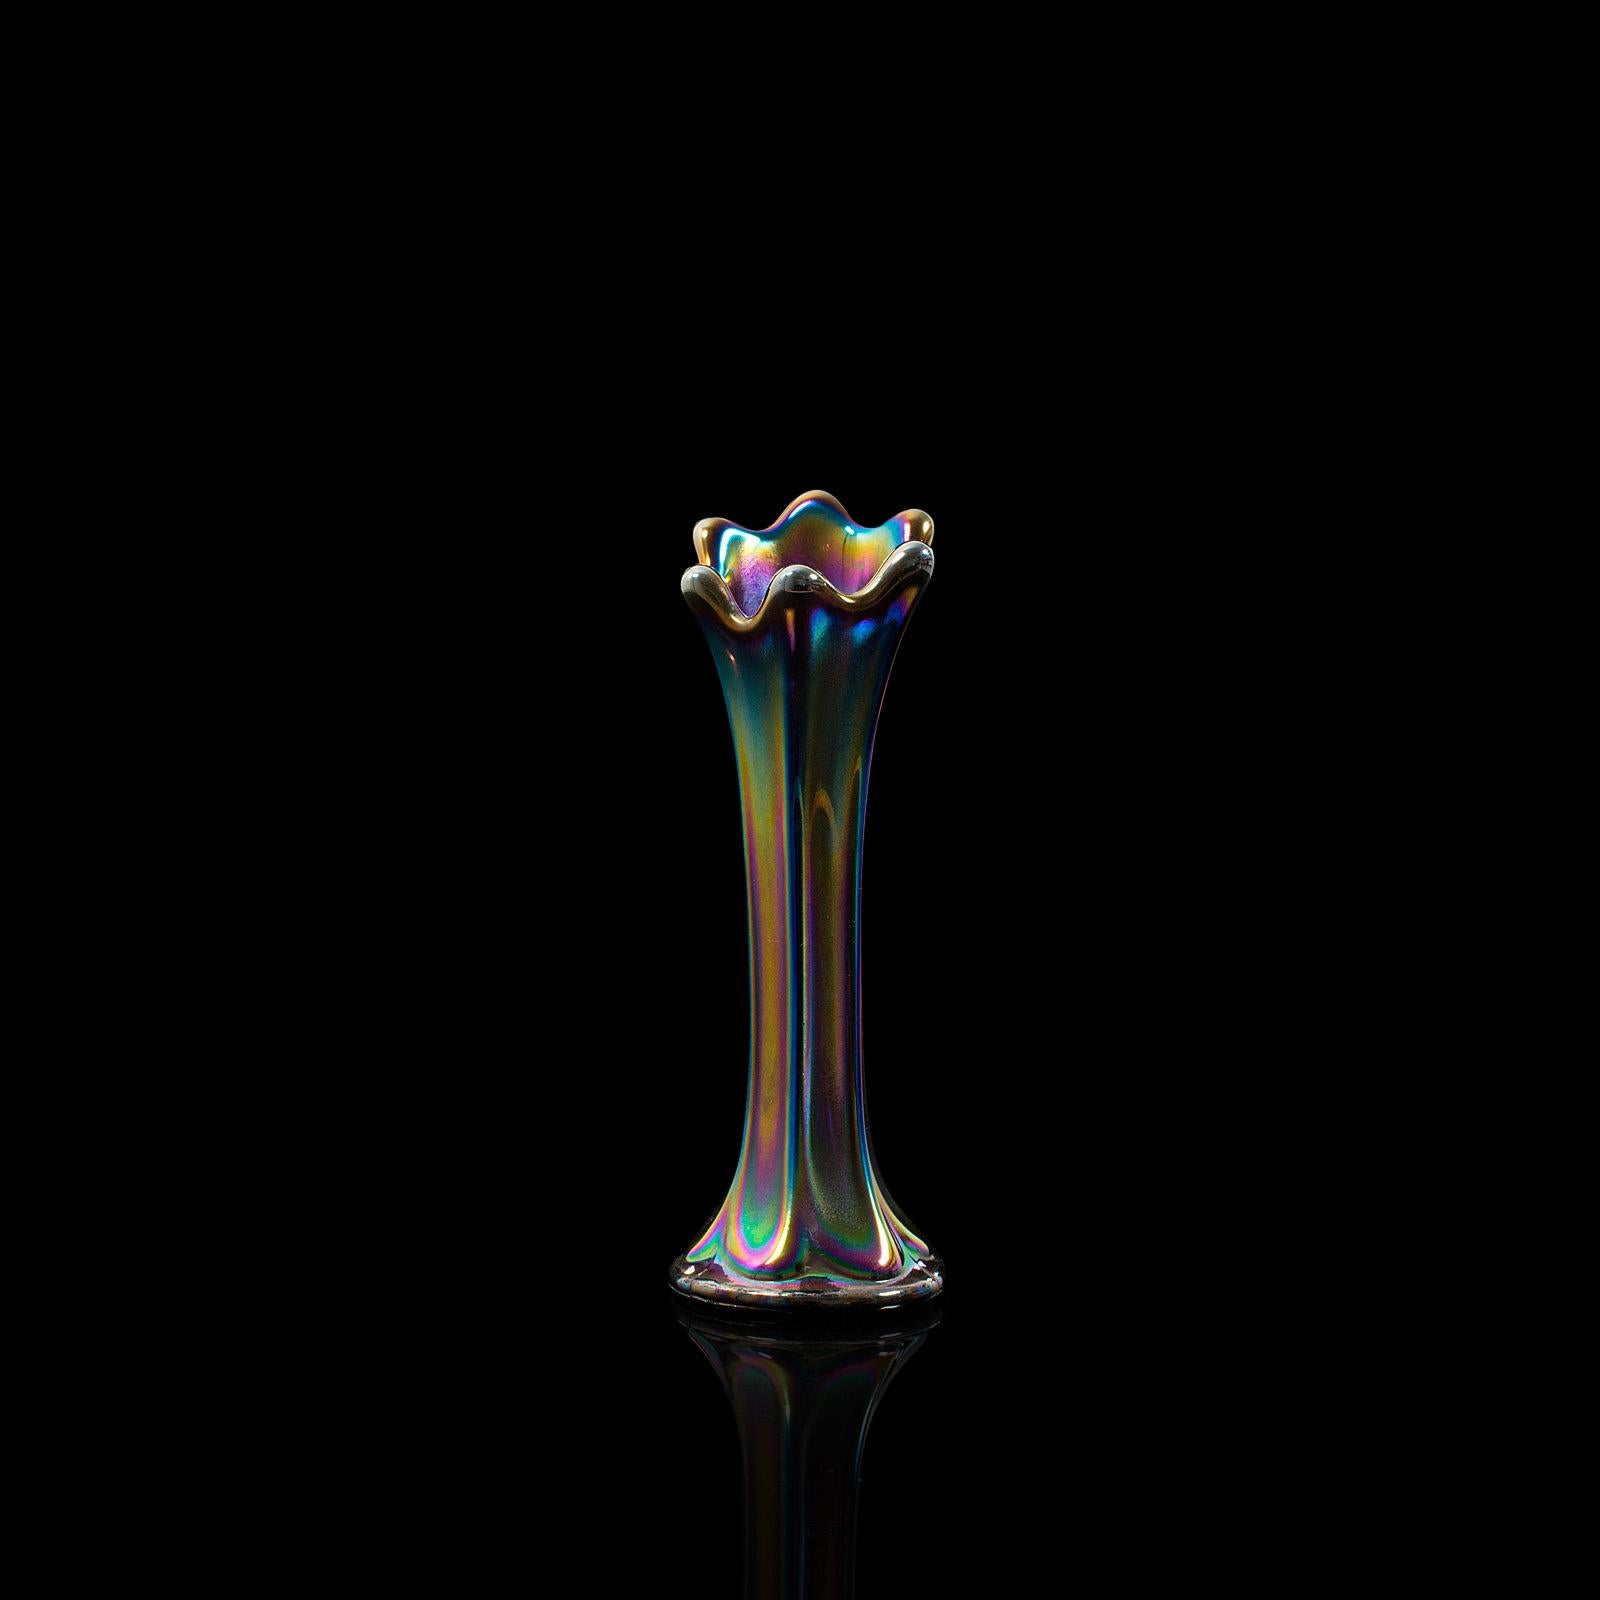 This is a small vintage posy vase. An English, carnival glass decorative flower vase, dating to the mid-20th century, circa 1950.

Dashing iridescent spectrum
Displaying a desirable aged patina
Colorful glass in very good order, free of cracks